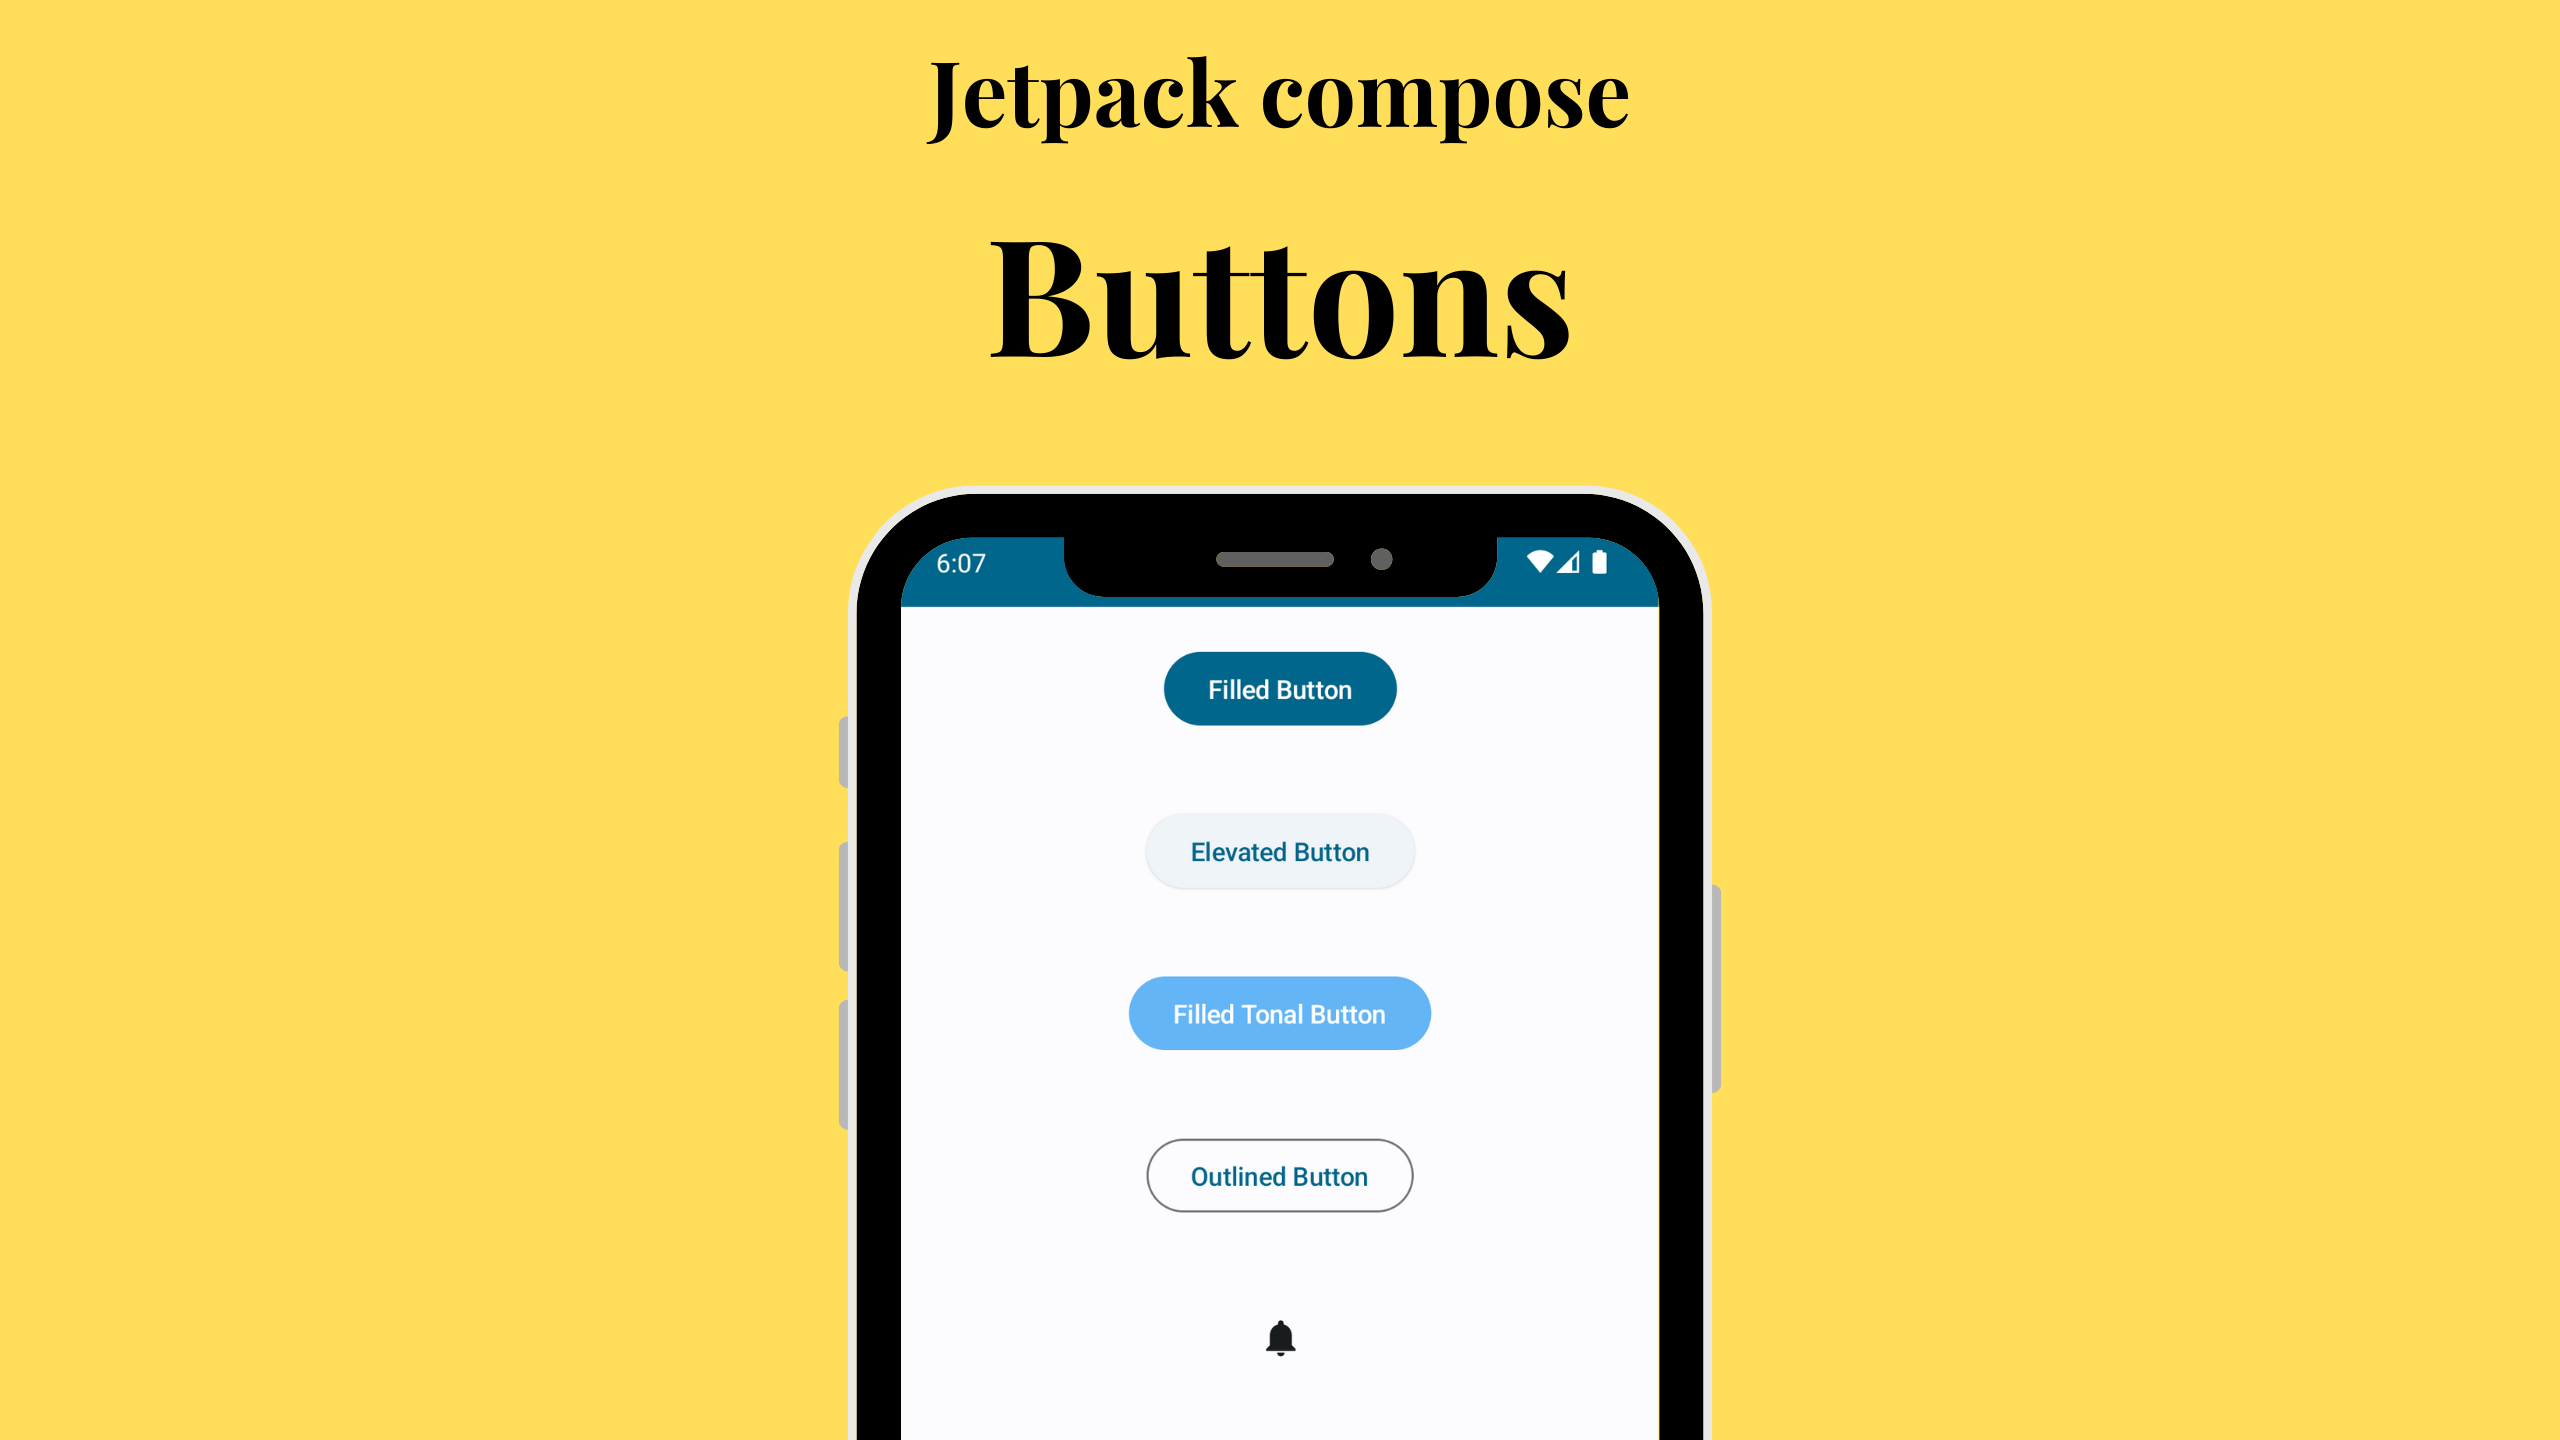 Jetpack compose : Buttons